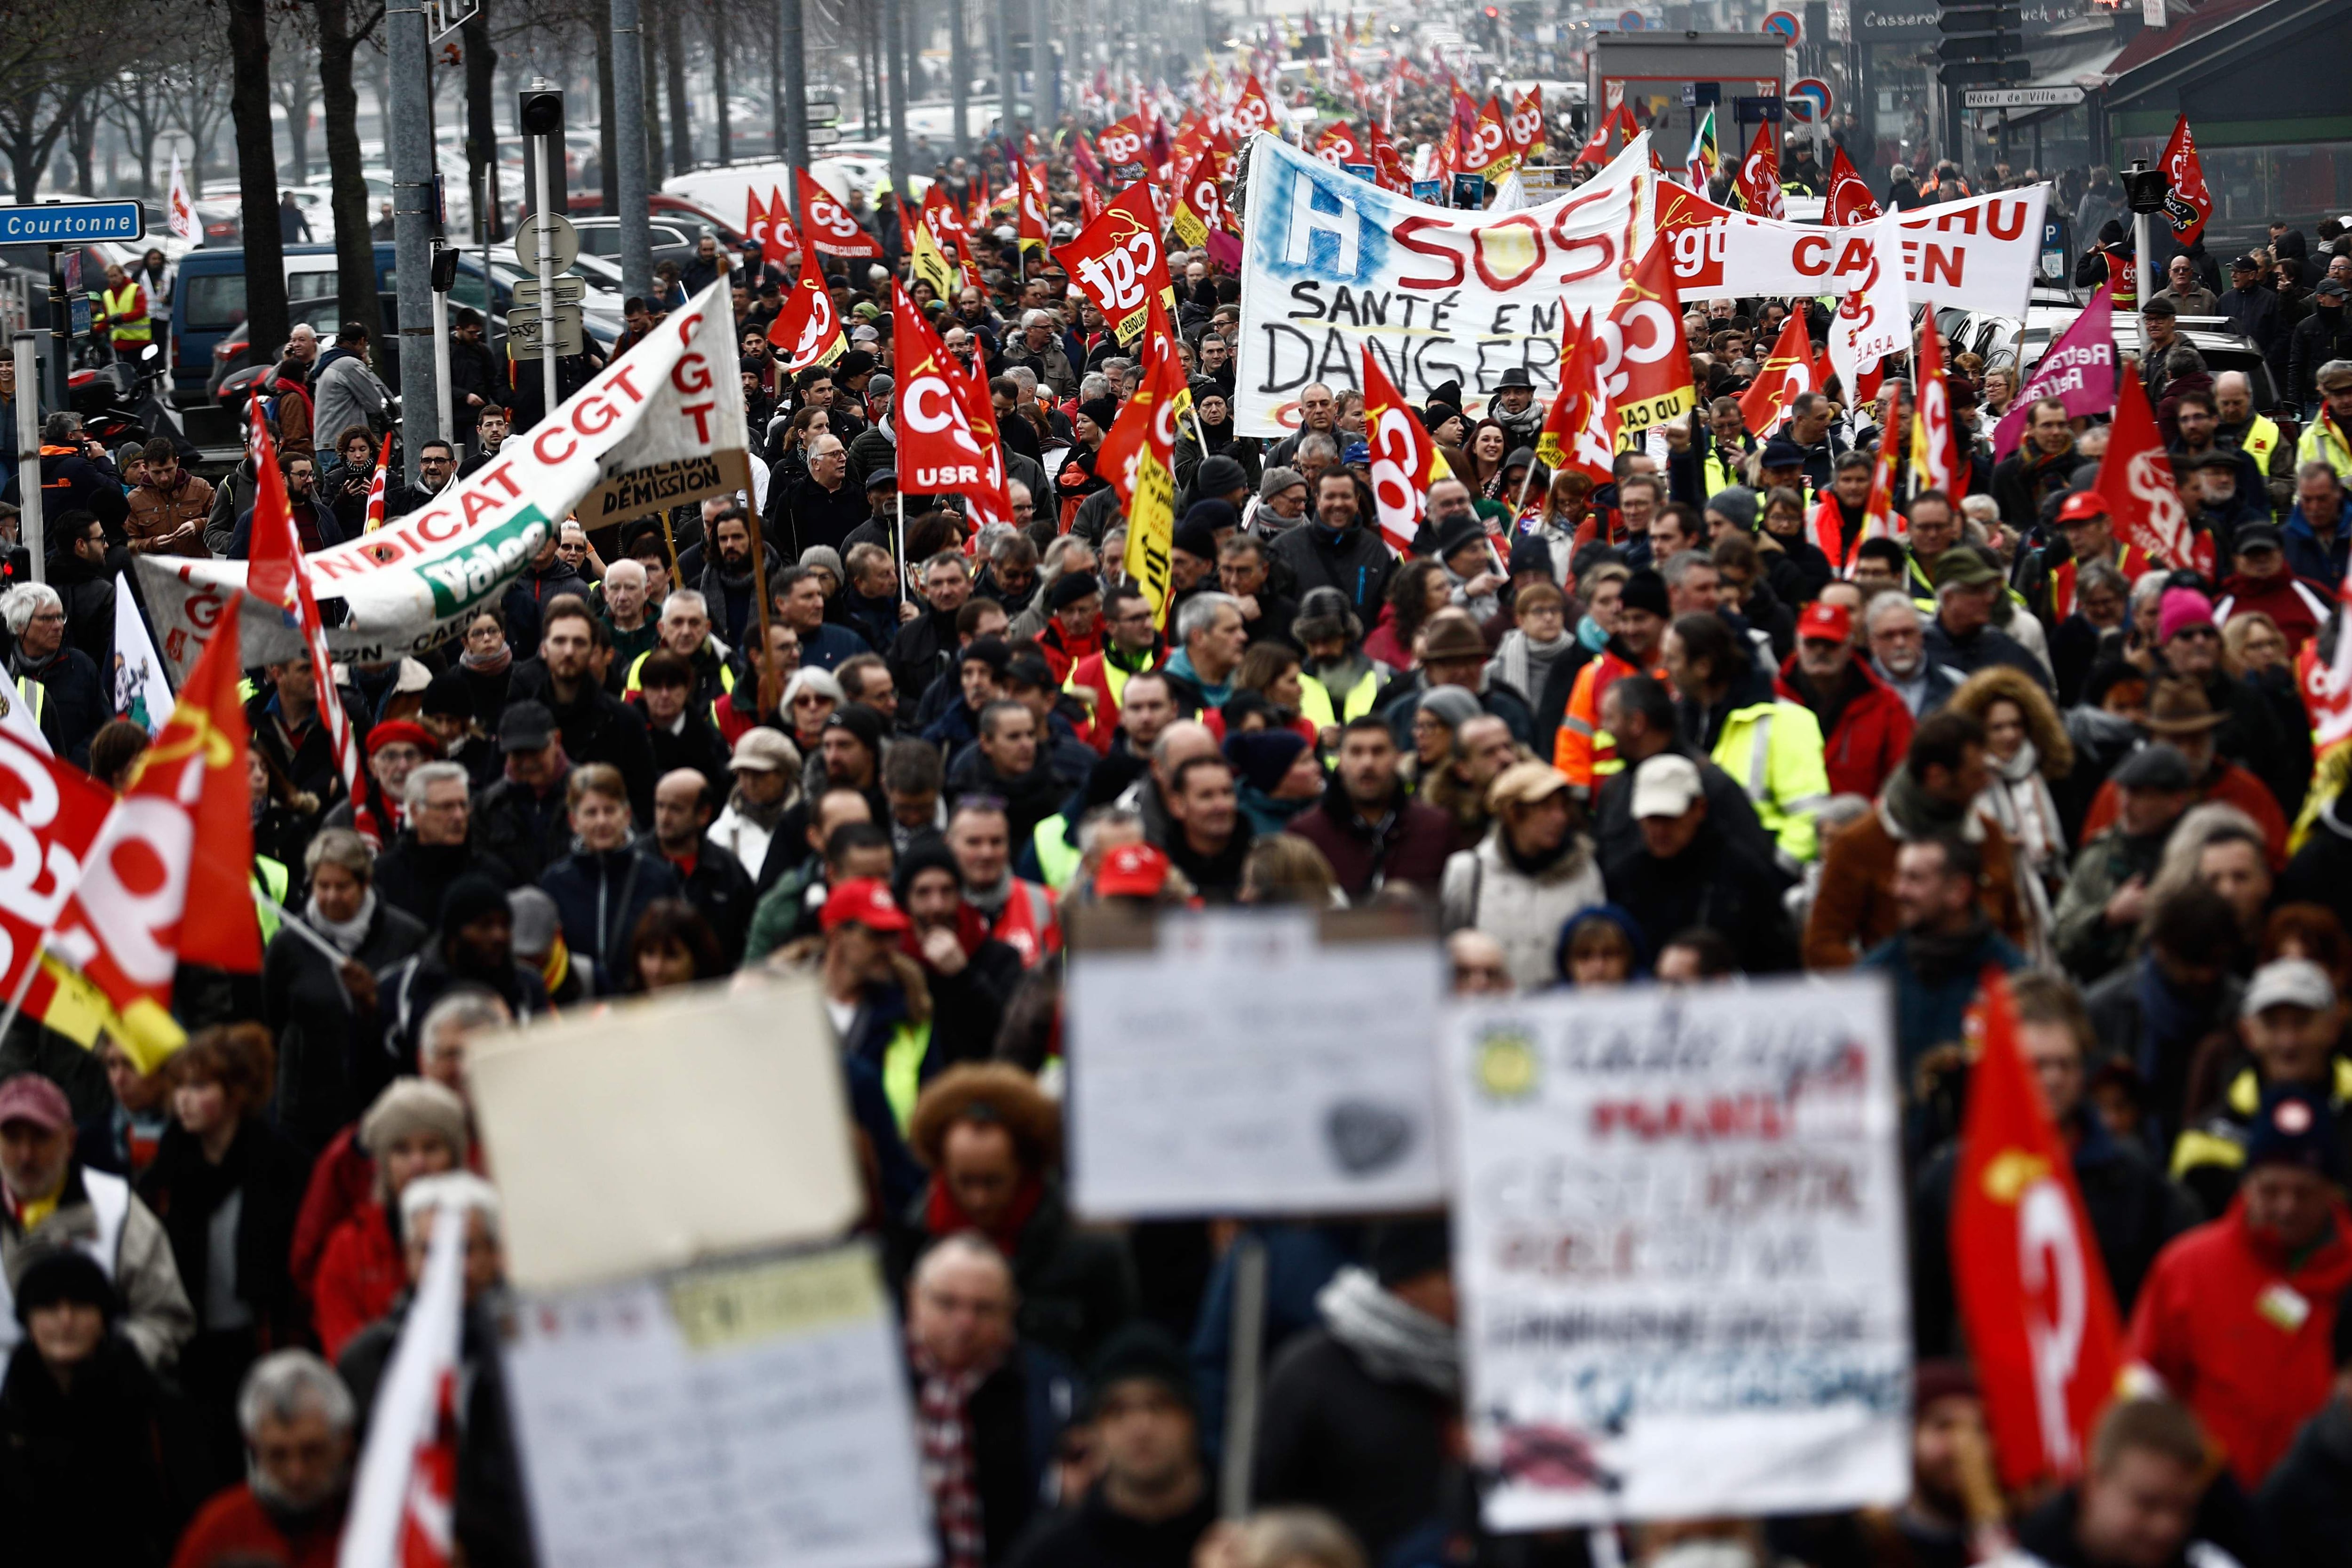 At the end of 2019, thousands of French people took to the streets to protest against the pension reform then proposed by President Macron.  AFP / Sameer Al-DOUMY